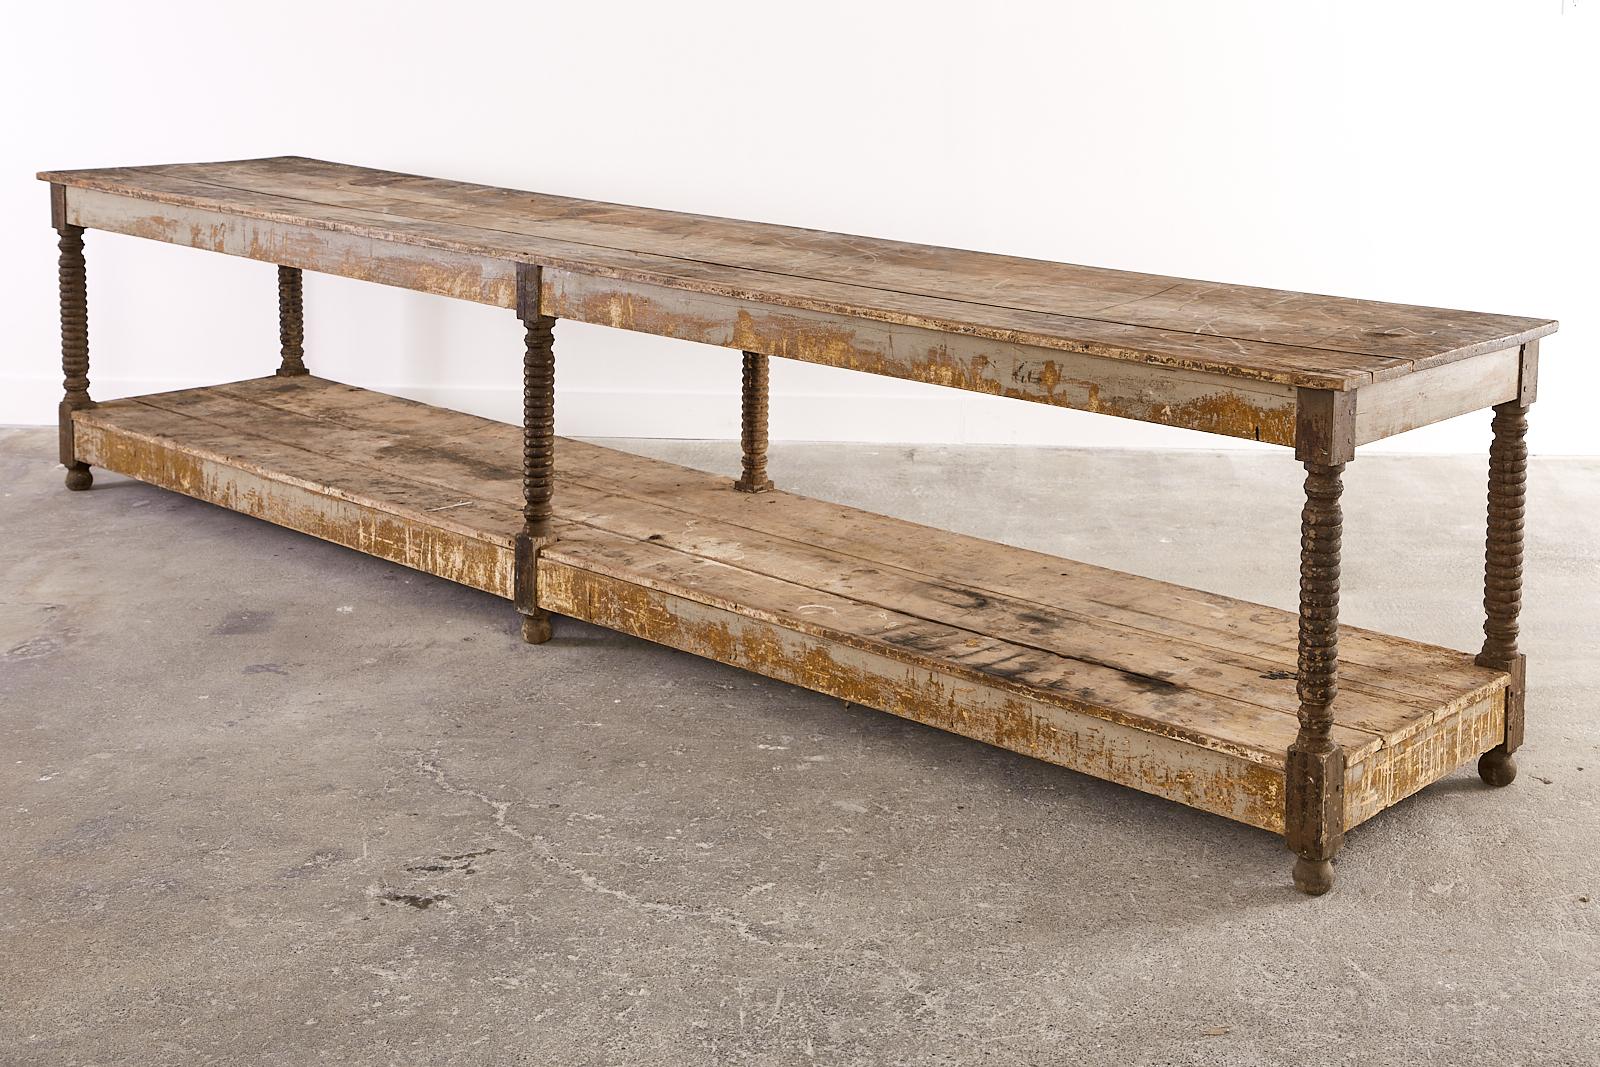 Fantastic monumental late 19th century French Drapers work table measuring 13 feet long. The massive 2 tier table features bobbin turned or spool legs ending with ball feet. The top is made of long planks 1 inch thick supported by an apron measuring